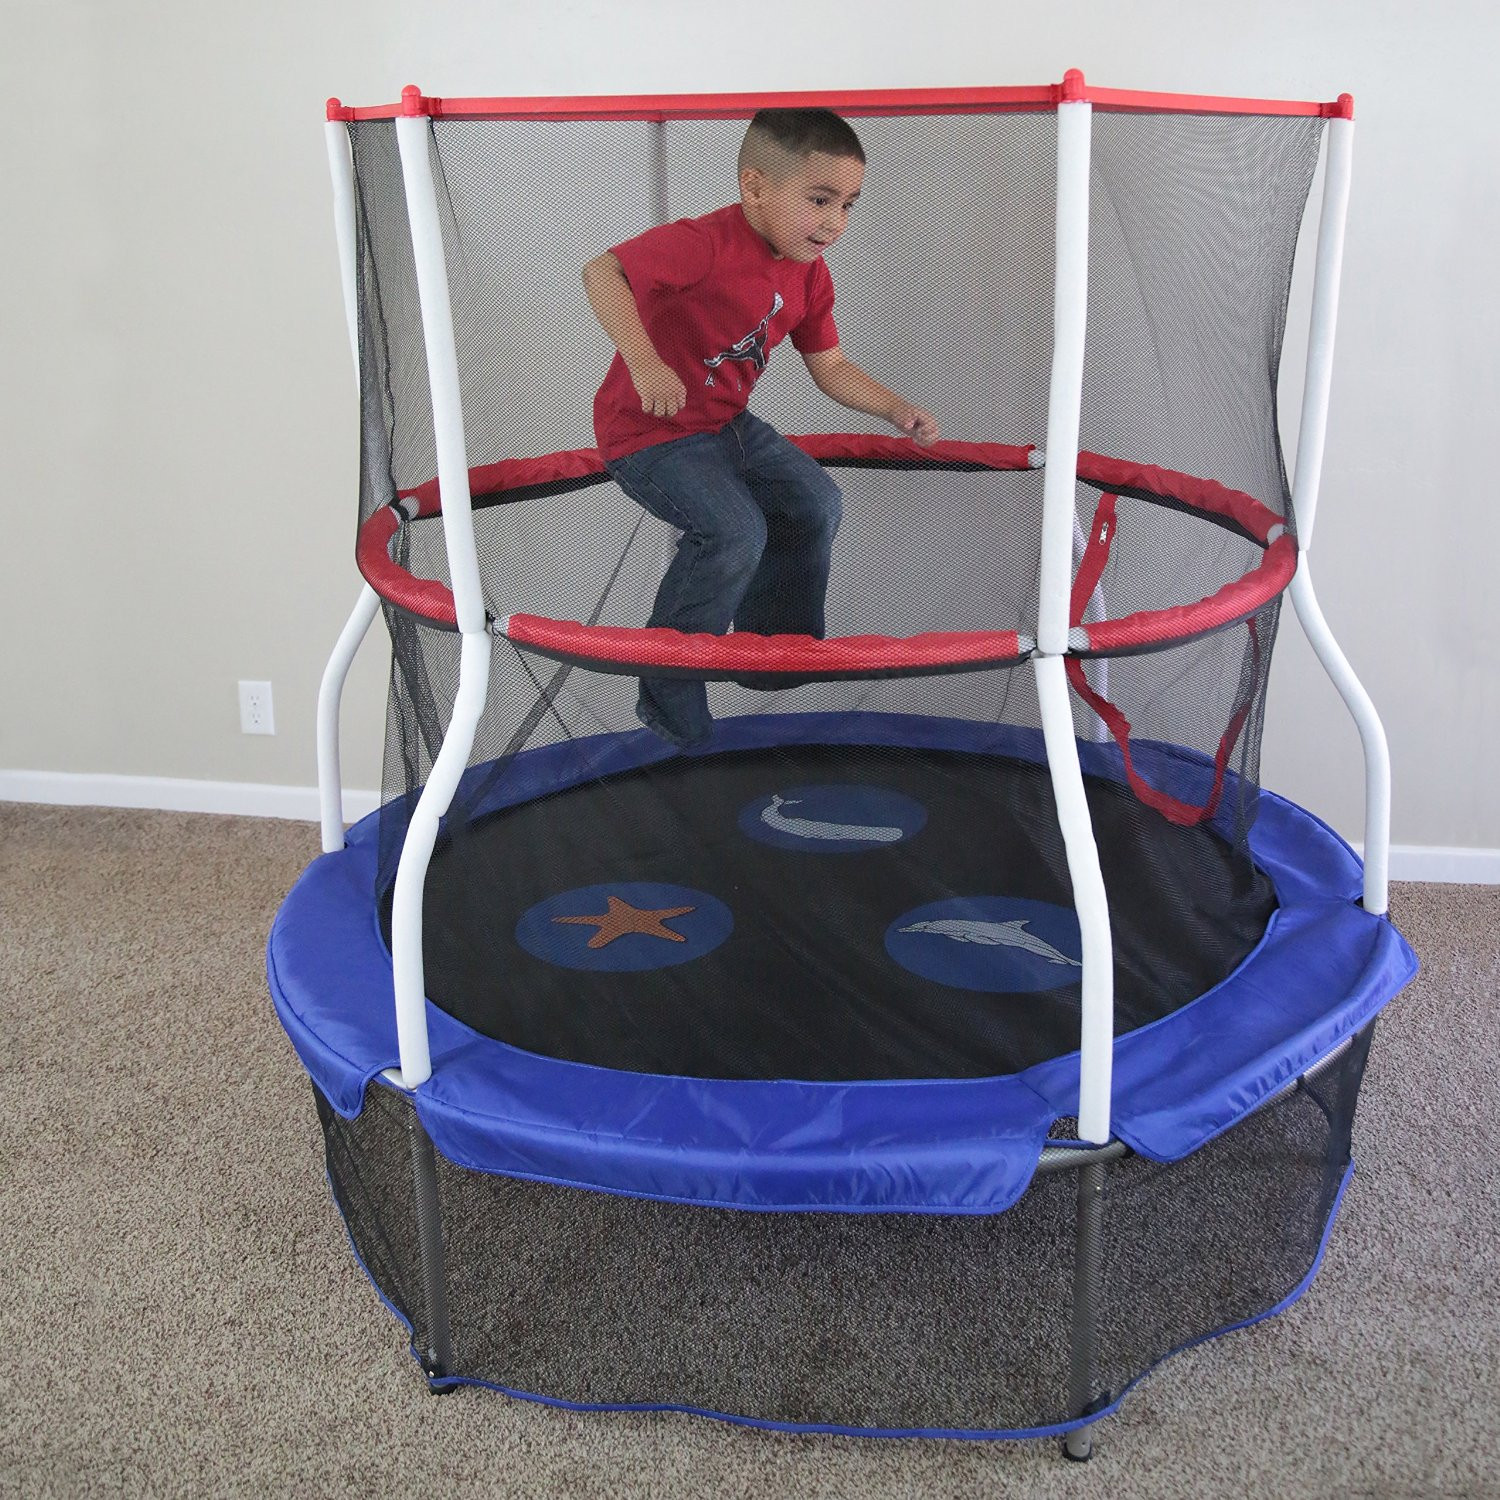 Indoor Trampoline For Kids
 Best Trampoline for Kids Our Top 3 Picks and Reviews